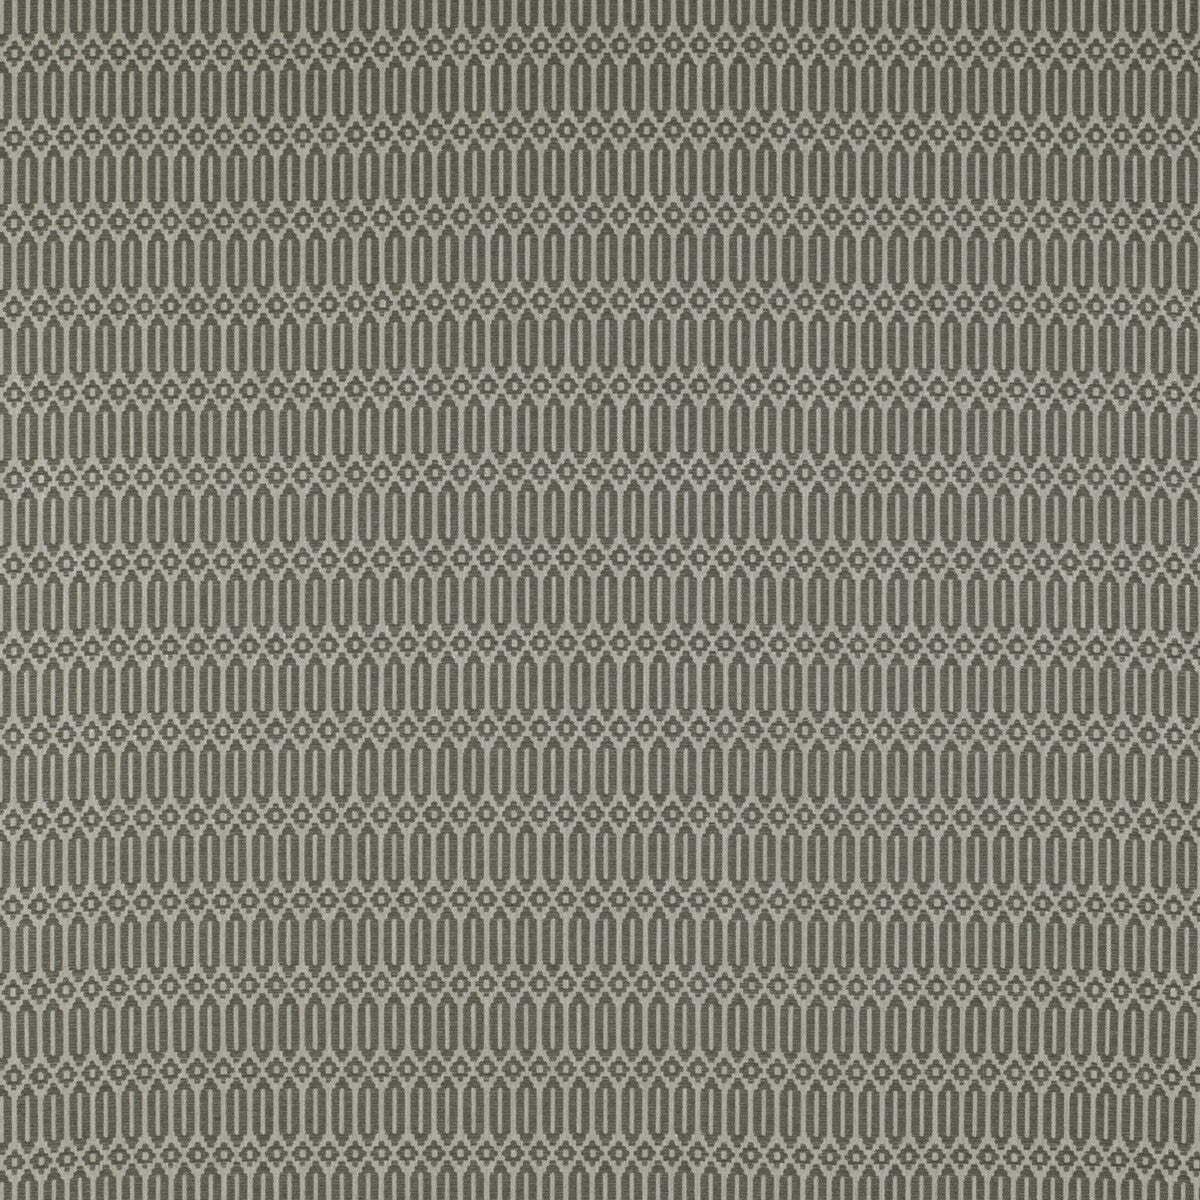 Varese fabric in gris color - pattern GDT5321.002.0 - by Gaston y Daniela in the Tierras collection